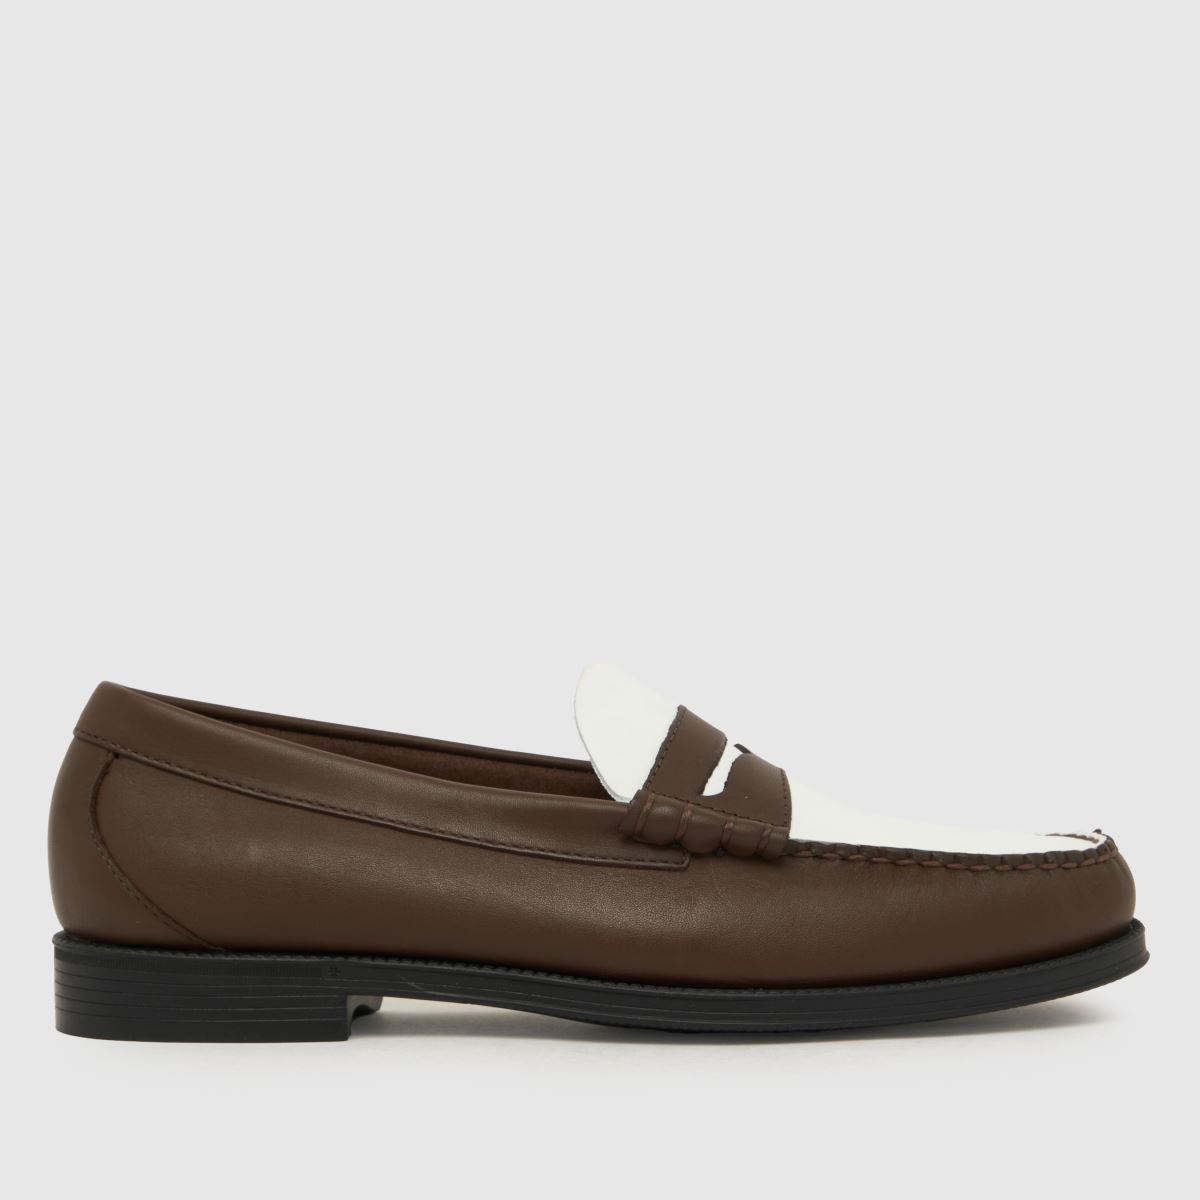 G.H. BASS weejun larson penny loafer shoes in brown multi